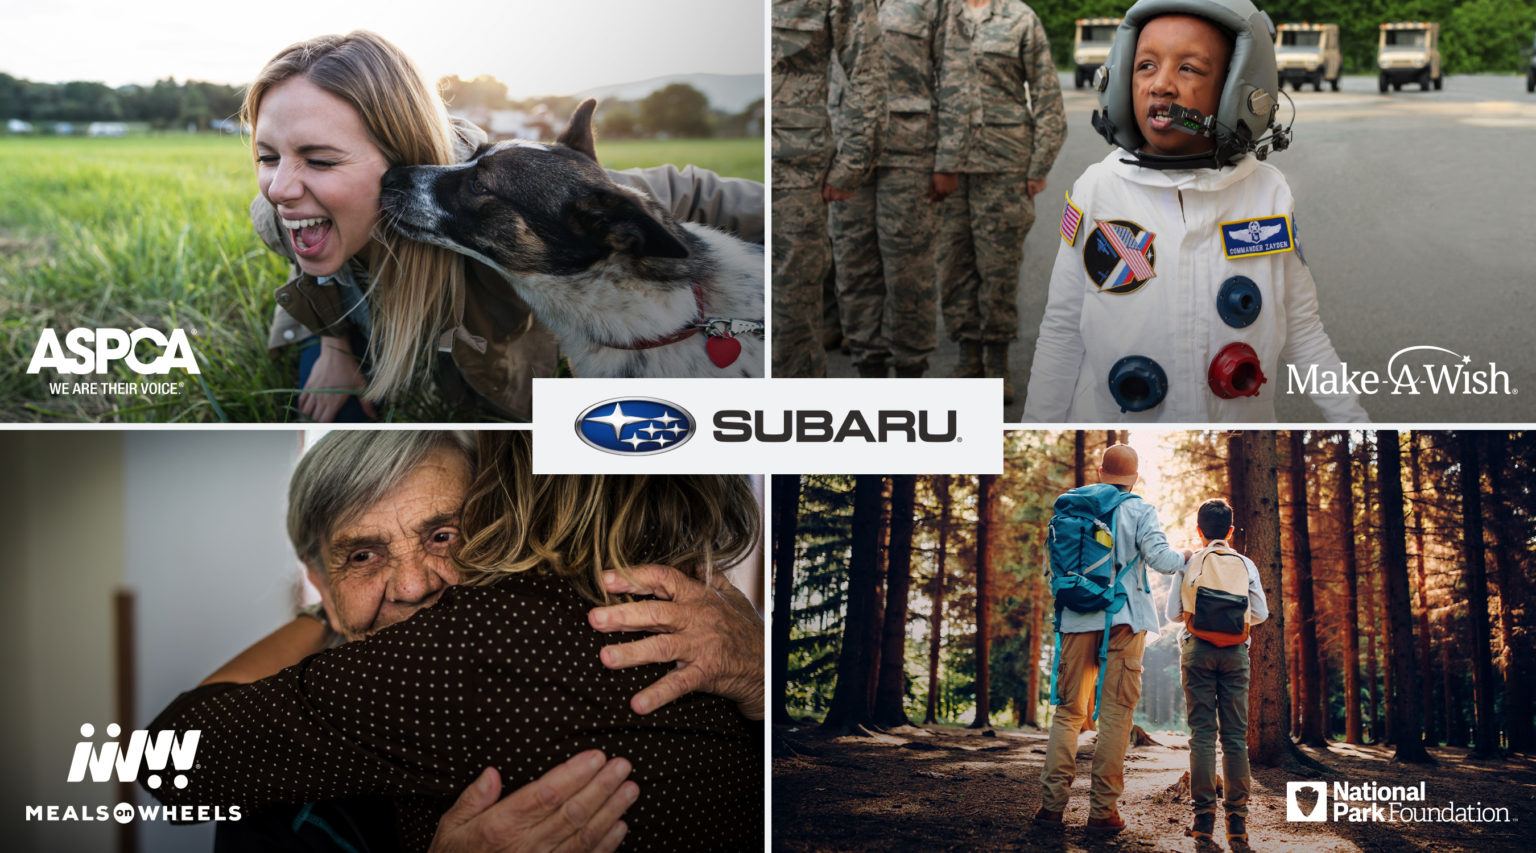 Subaru brought back its popular year-end donation campaign in 2020.